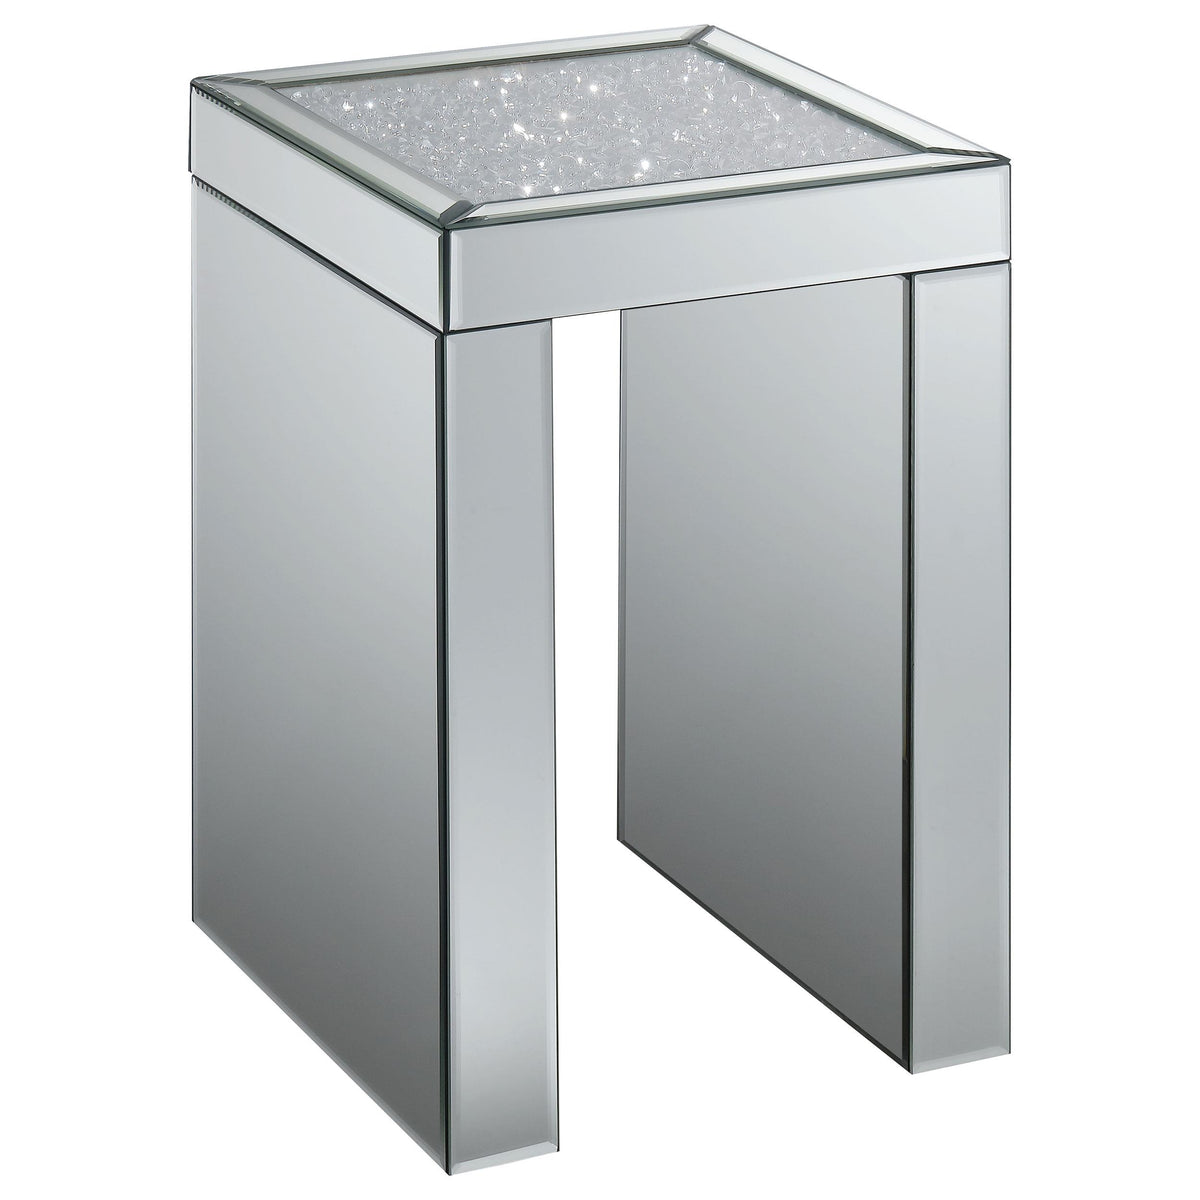 G930207 Contemporary Mirrored Side Table  Half Price Furniture